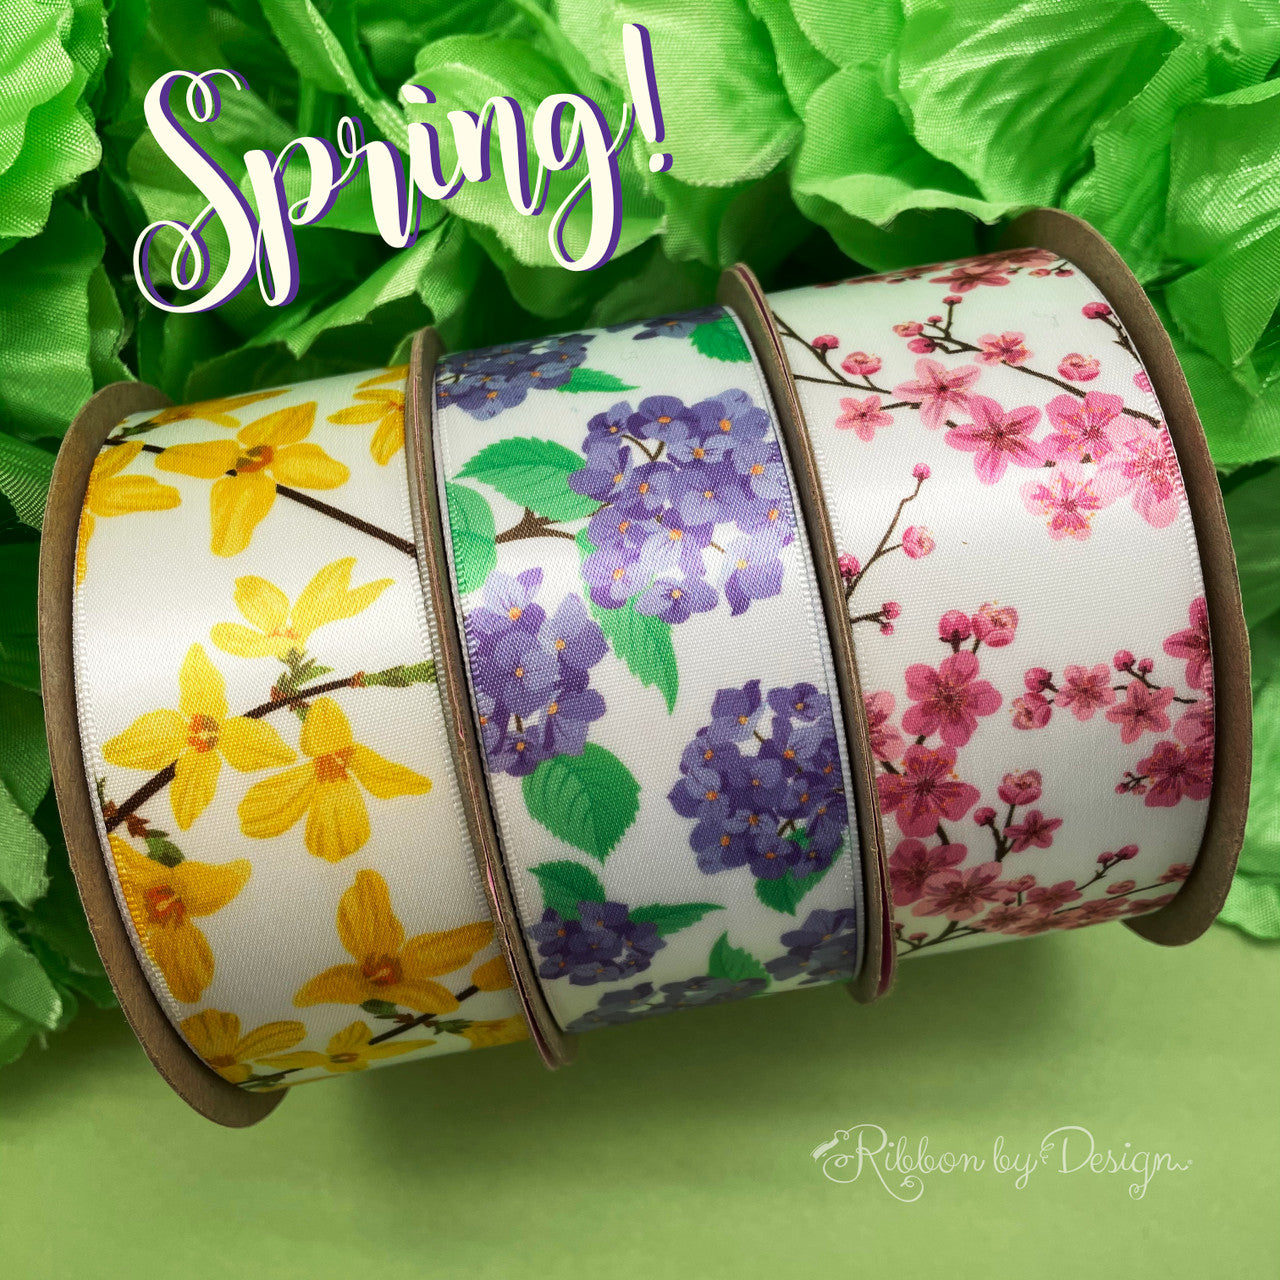 Our Spring floral ribbons are perfect together or on their own!